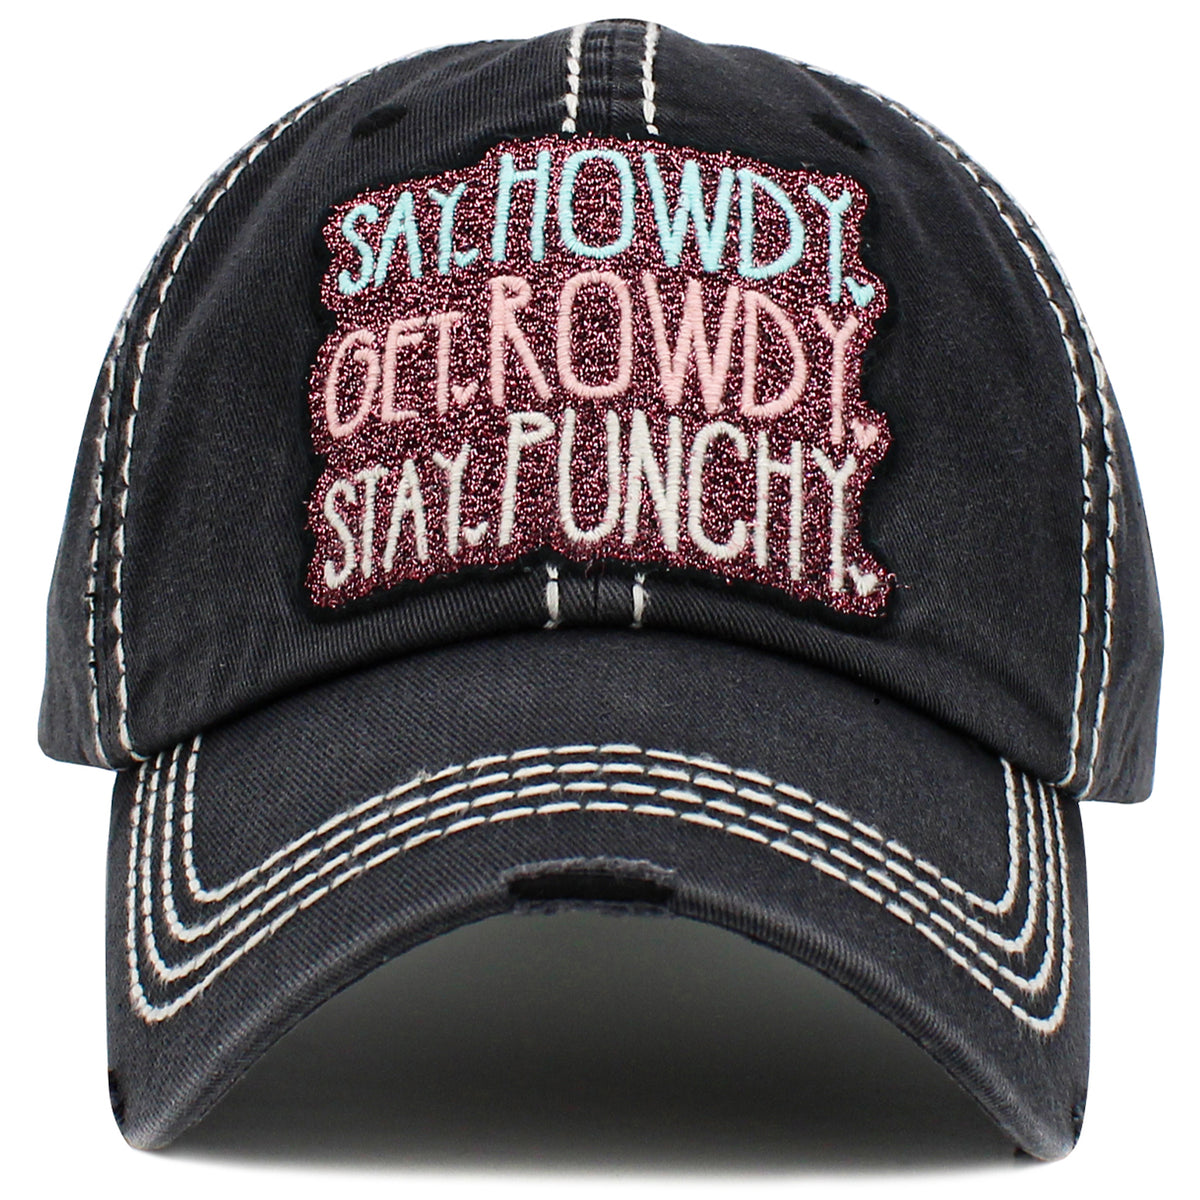 1522 - Say Howdy Get Rowdy Stay Punchy Hat - Black